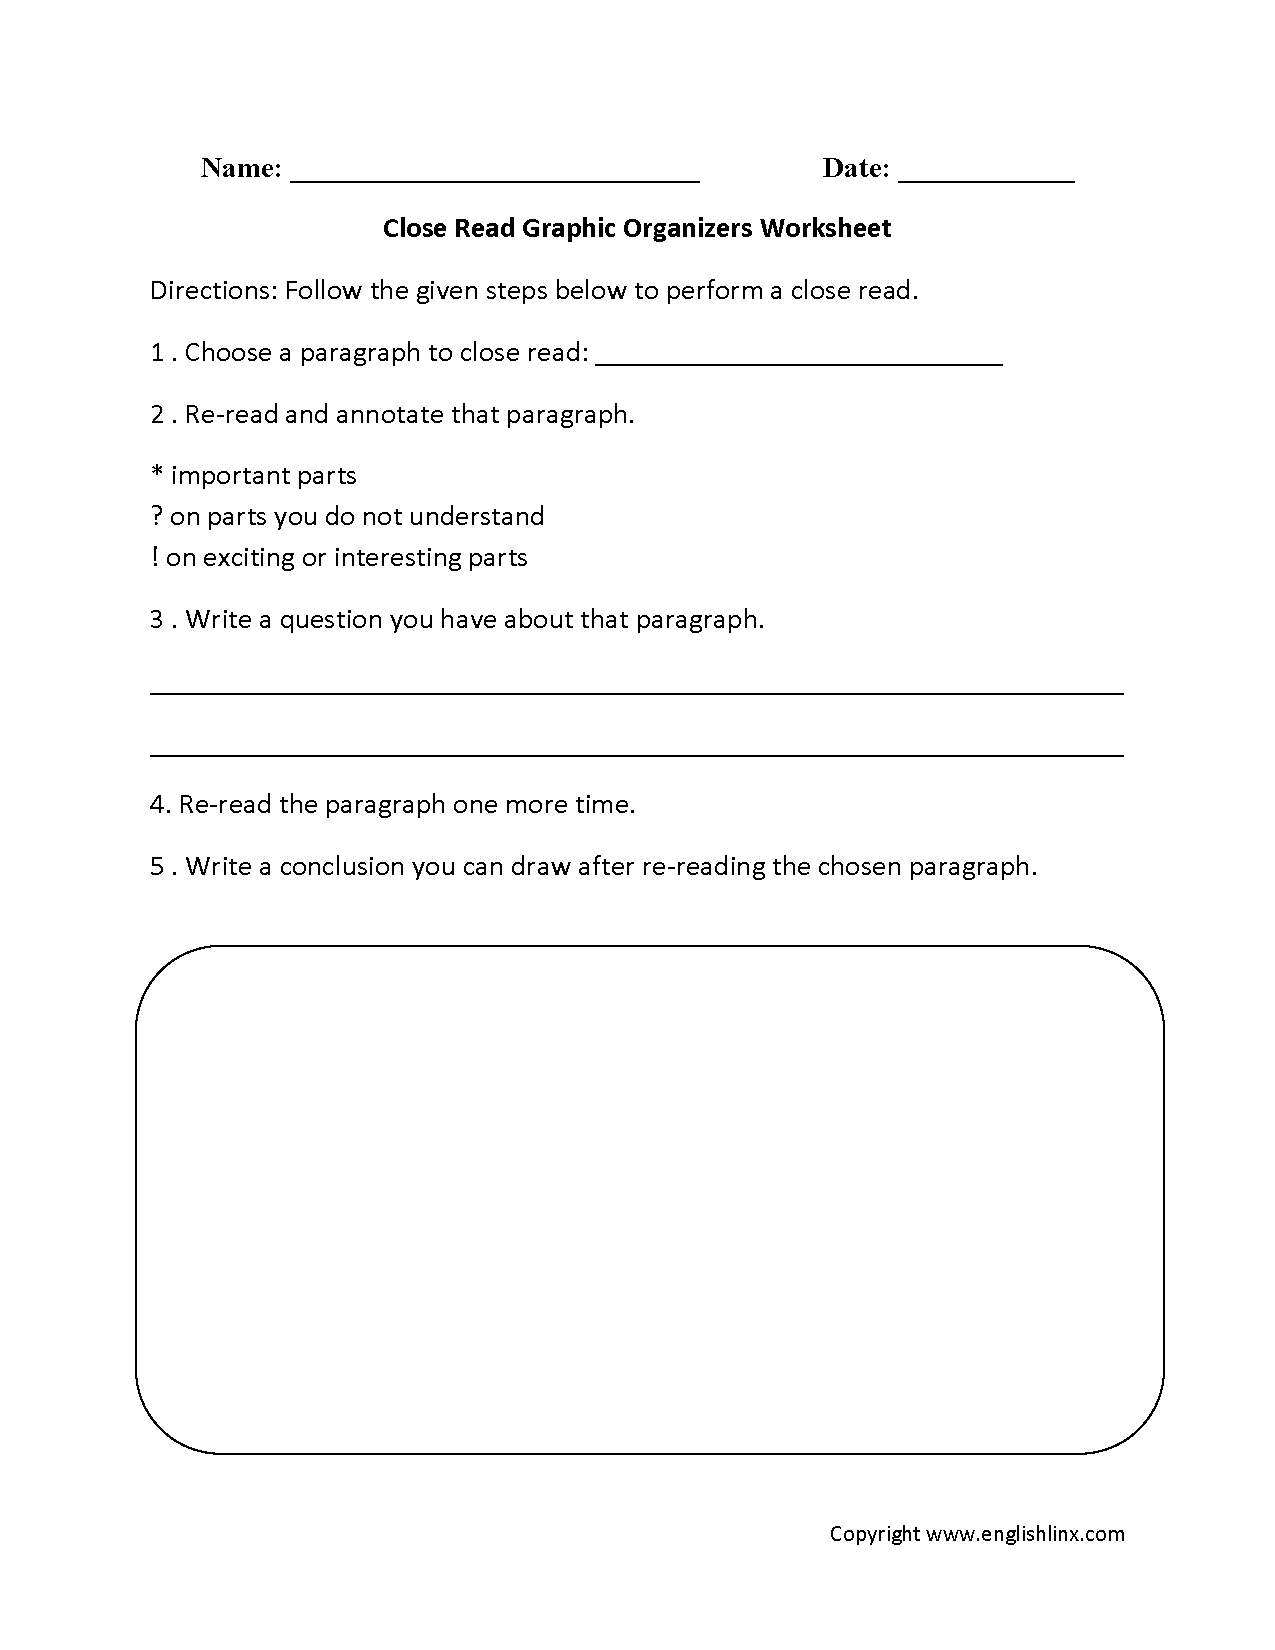 Close Read Graphic Organizers Worksheets